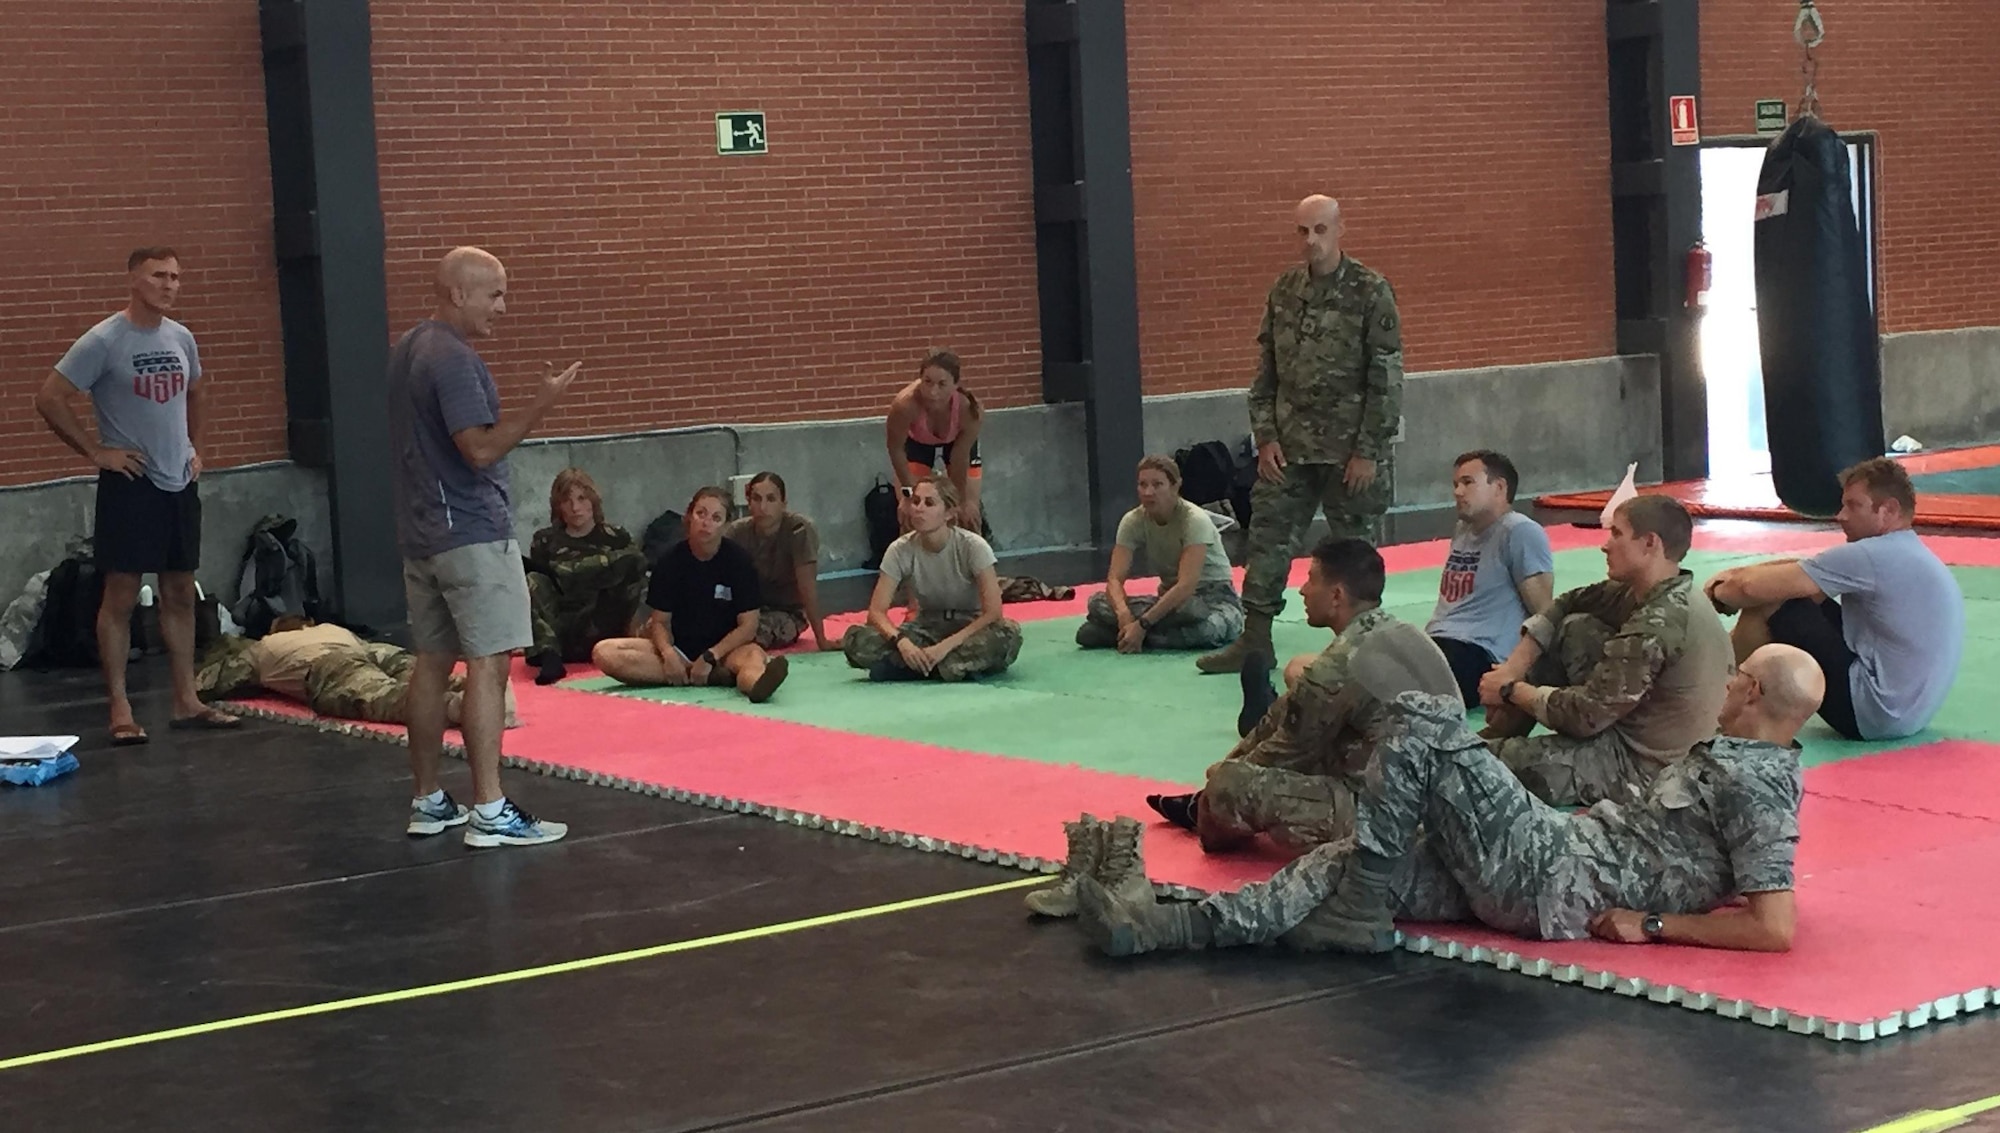 After an exhausting day on the land obstacle course, Lt. Col. Daryl Remick (center, standing) former competitor, Georgia Army National Guard and full-time emergency room physician, teaches Tactical Combat Casualty Care, ably assisted by Staff Sgt. Reuben Sublett (standing right), Army Reserve Medic.